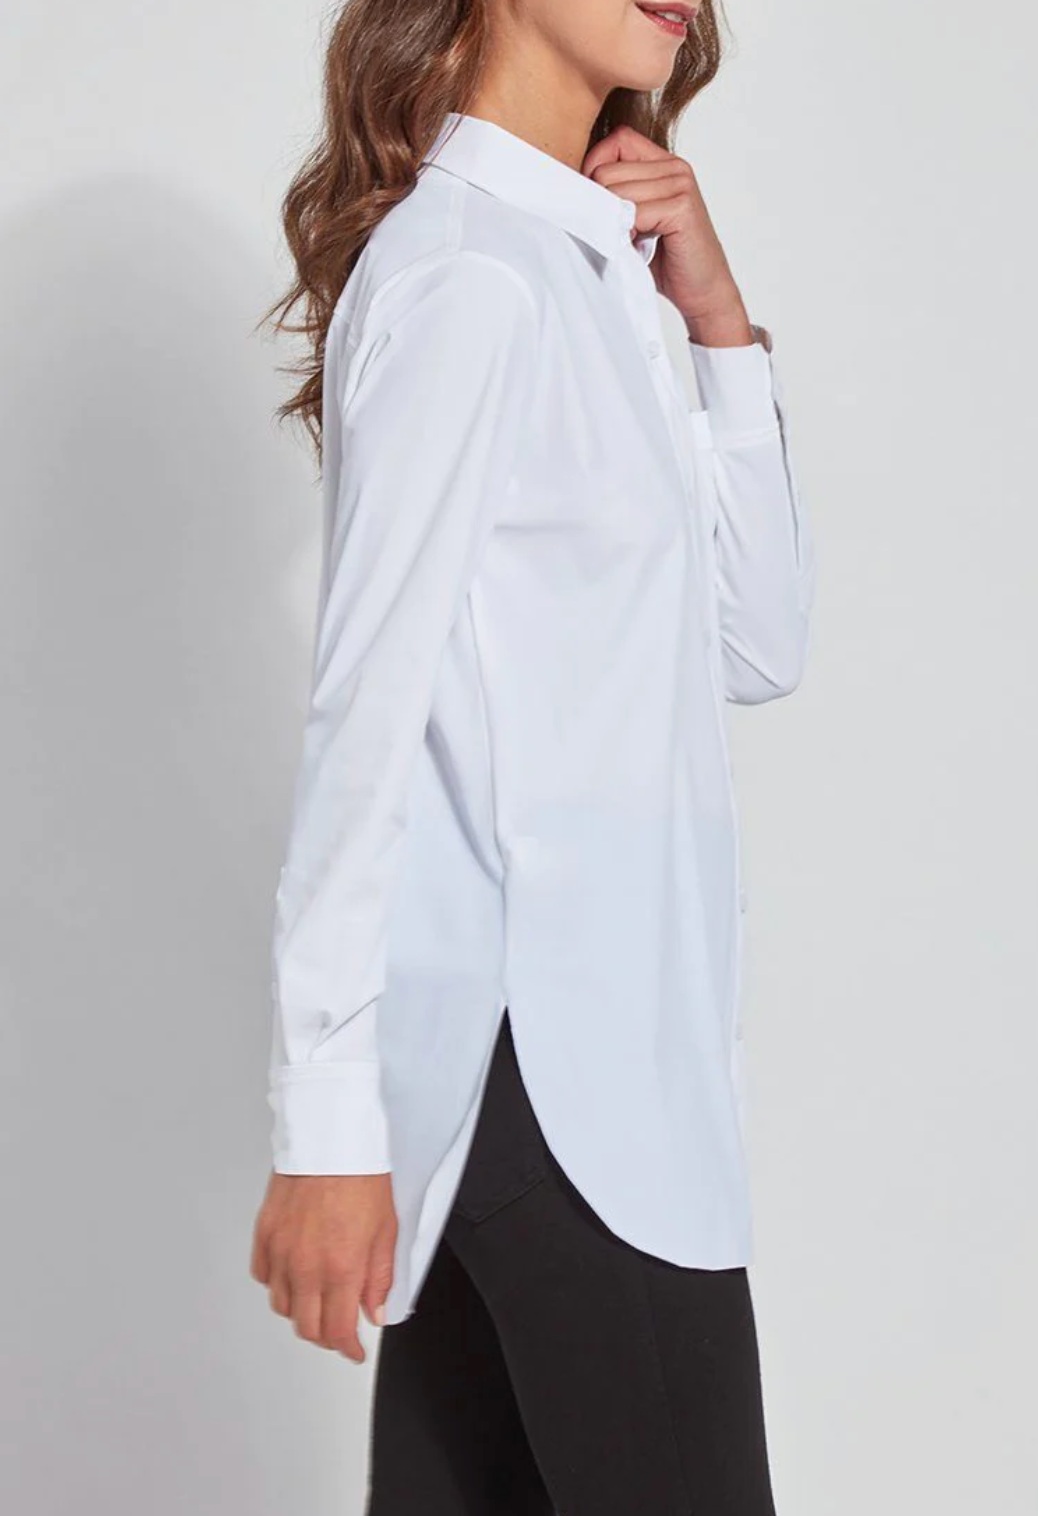 Schiffer Blouse in White - The French Shoppe